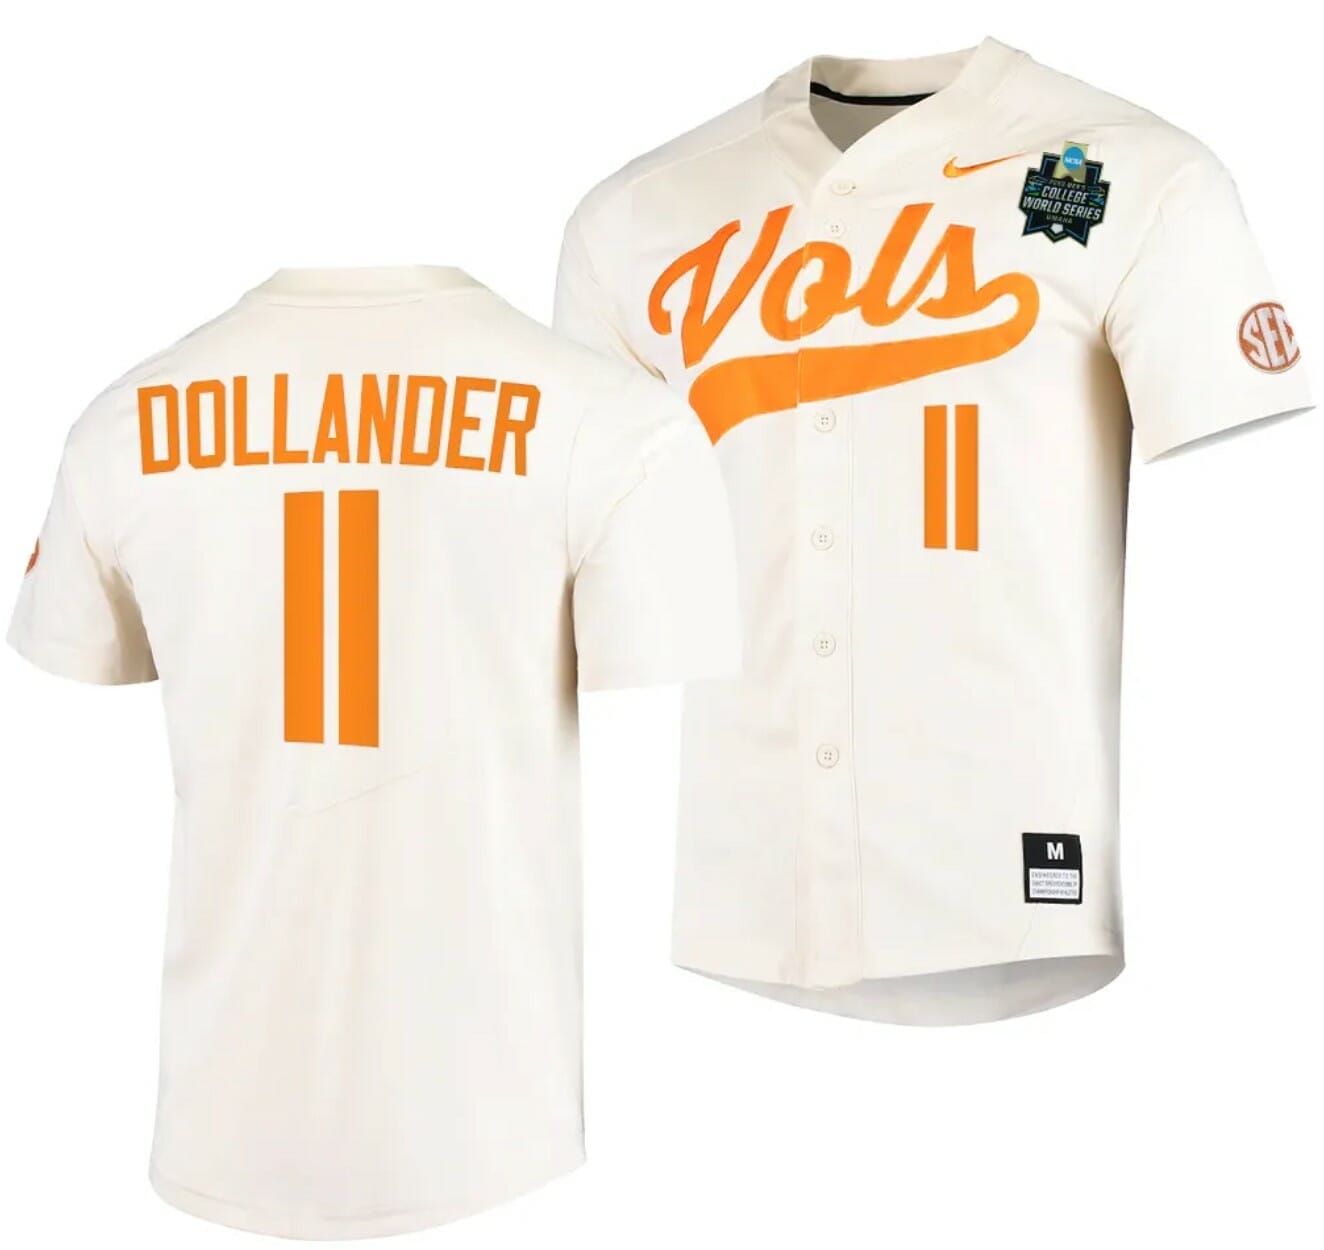 Available] New Chase Dollander Jersey Tennessee Gray #11